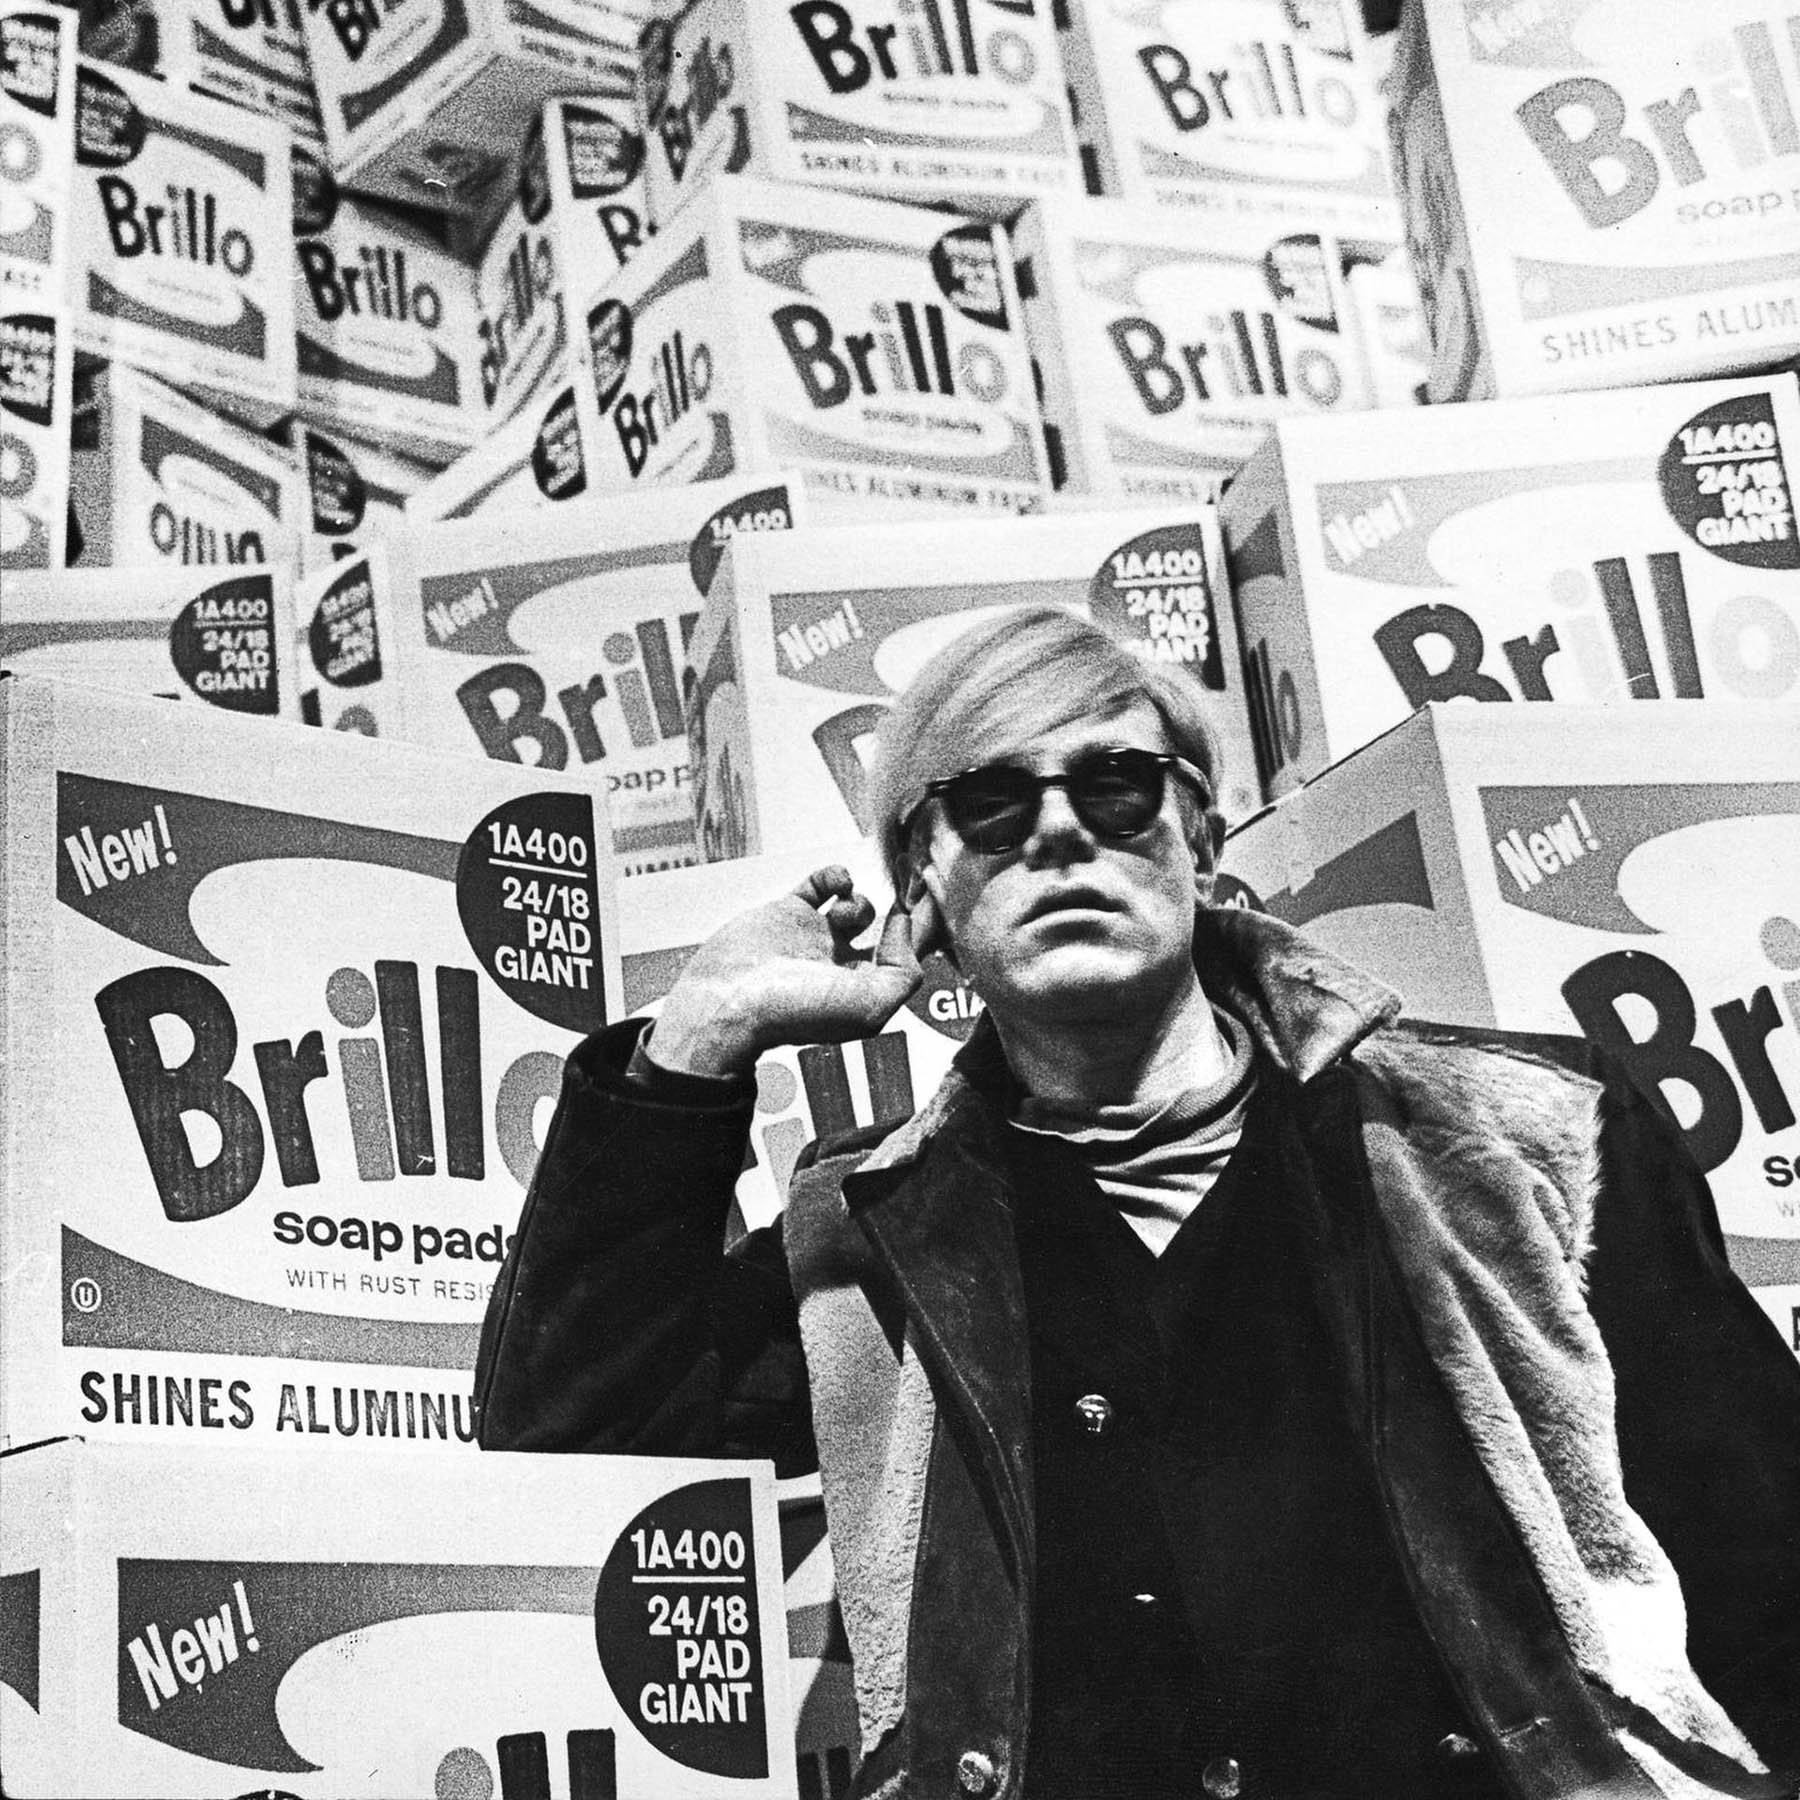 Picture of Andy Warhol in front of Brillo boxes.